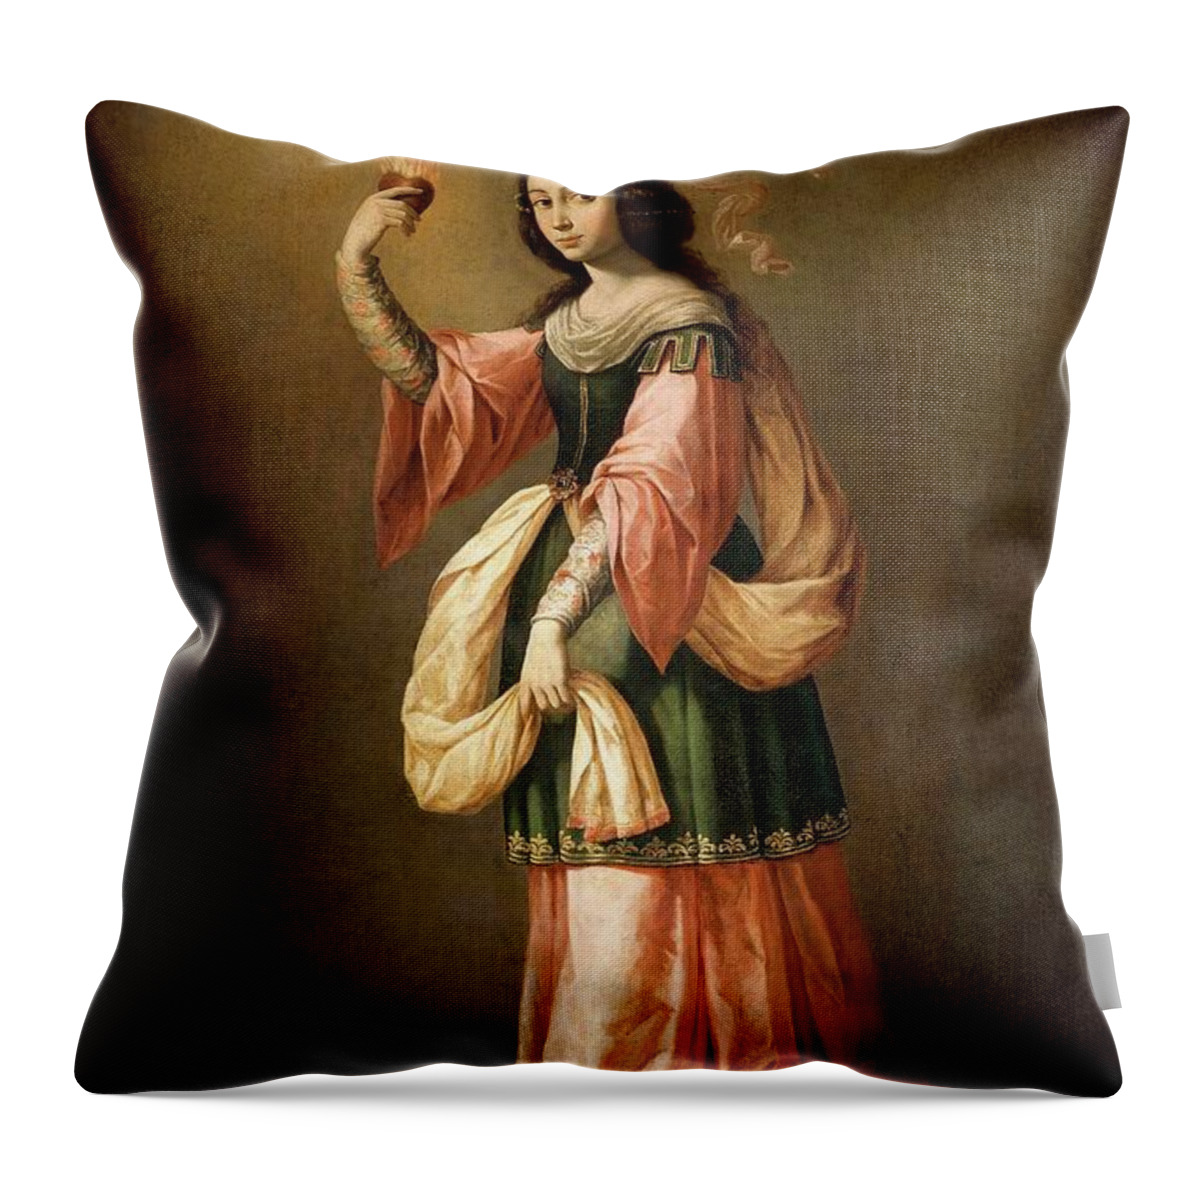 Allegory Of Charity Throw Pillow featuring the painting Francisco de Zurbaran / 'Allegory of Charity', ca. 1655, Spanish School. by Francisco de Zurbaran -c 1598-1664-